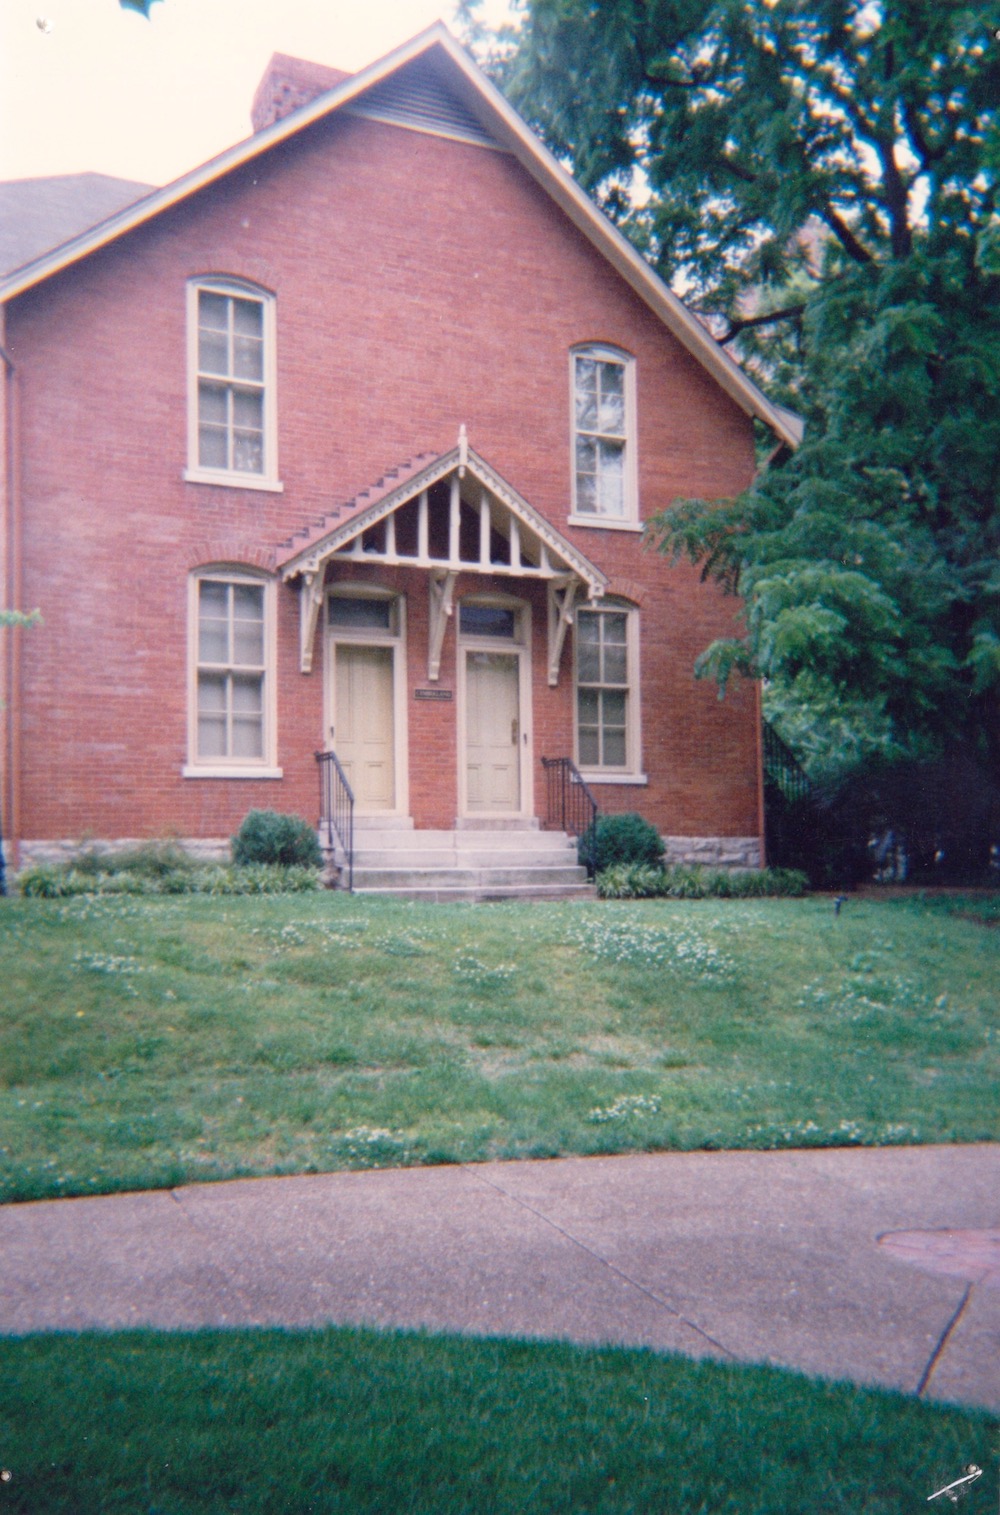 Photo of Belleview West Side Row, Campus Residence of Dean K.C. Potter and the meeting place for Lambda at Vanderbilt University, Nashville, TN. 